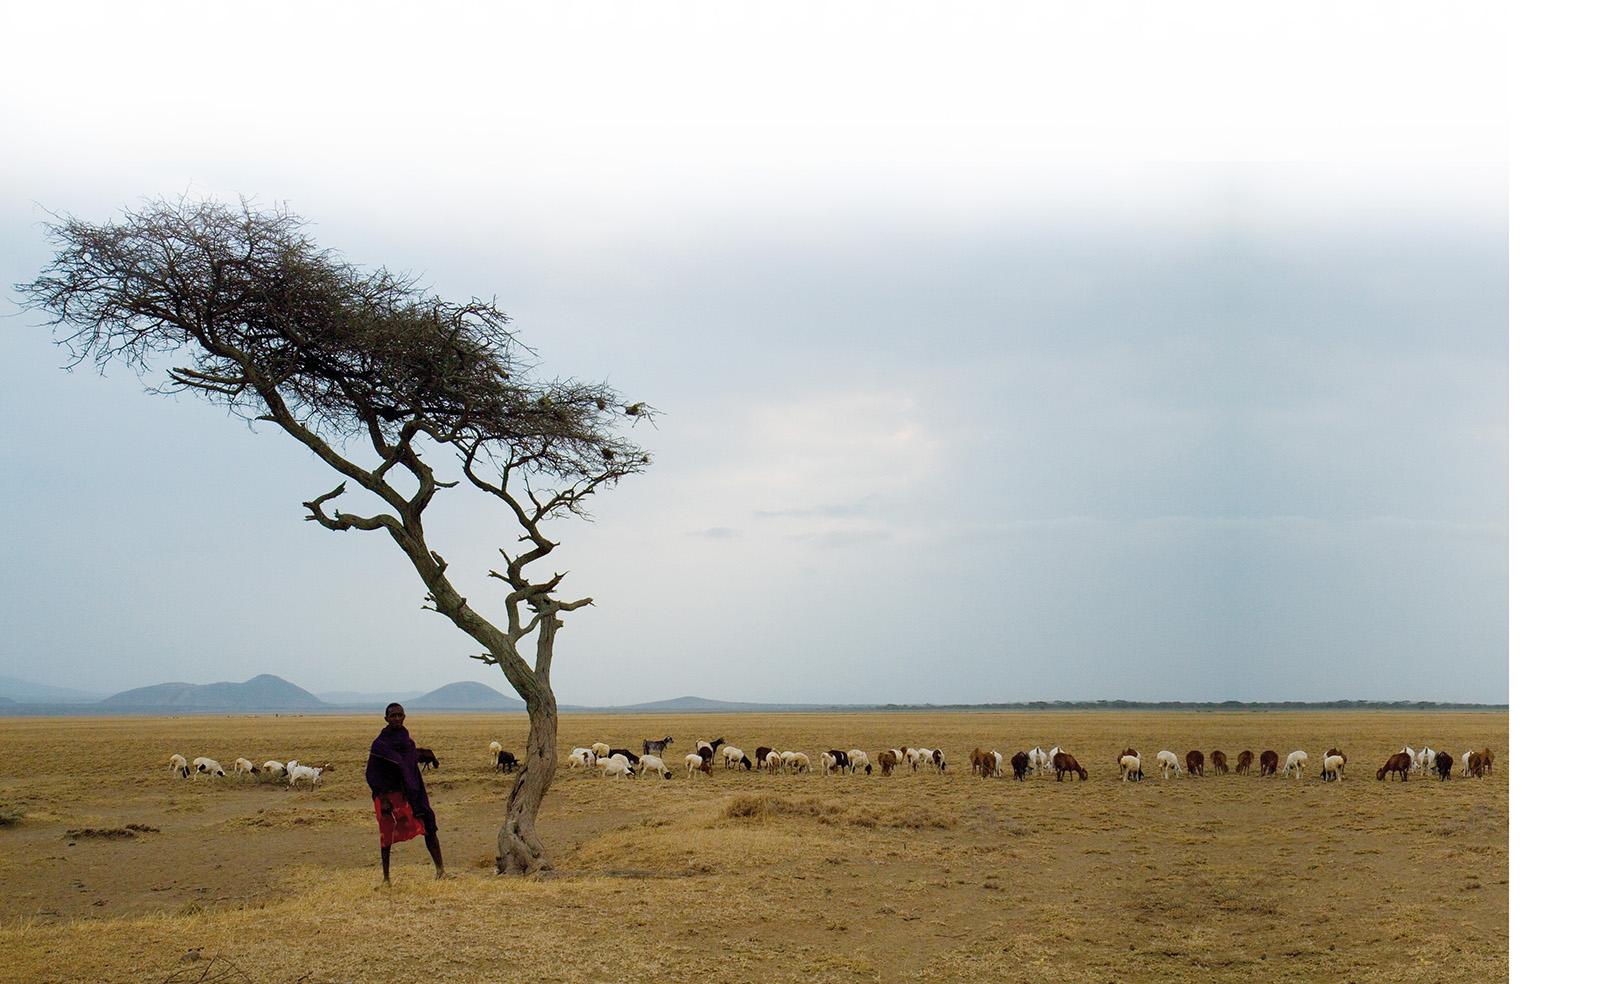 Lonely tree and lots of goats, big field